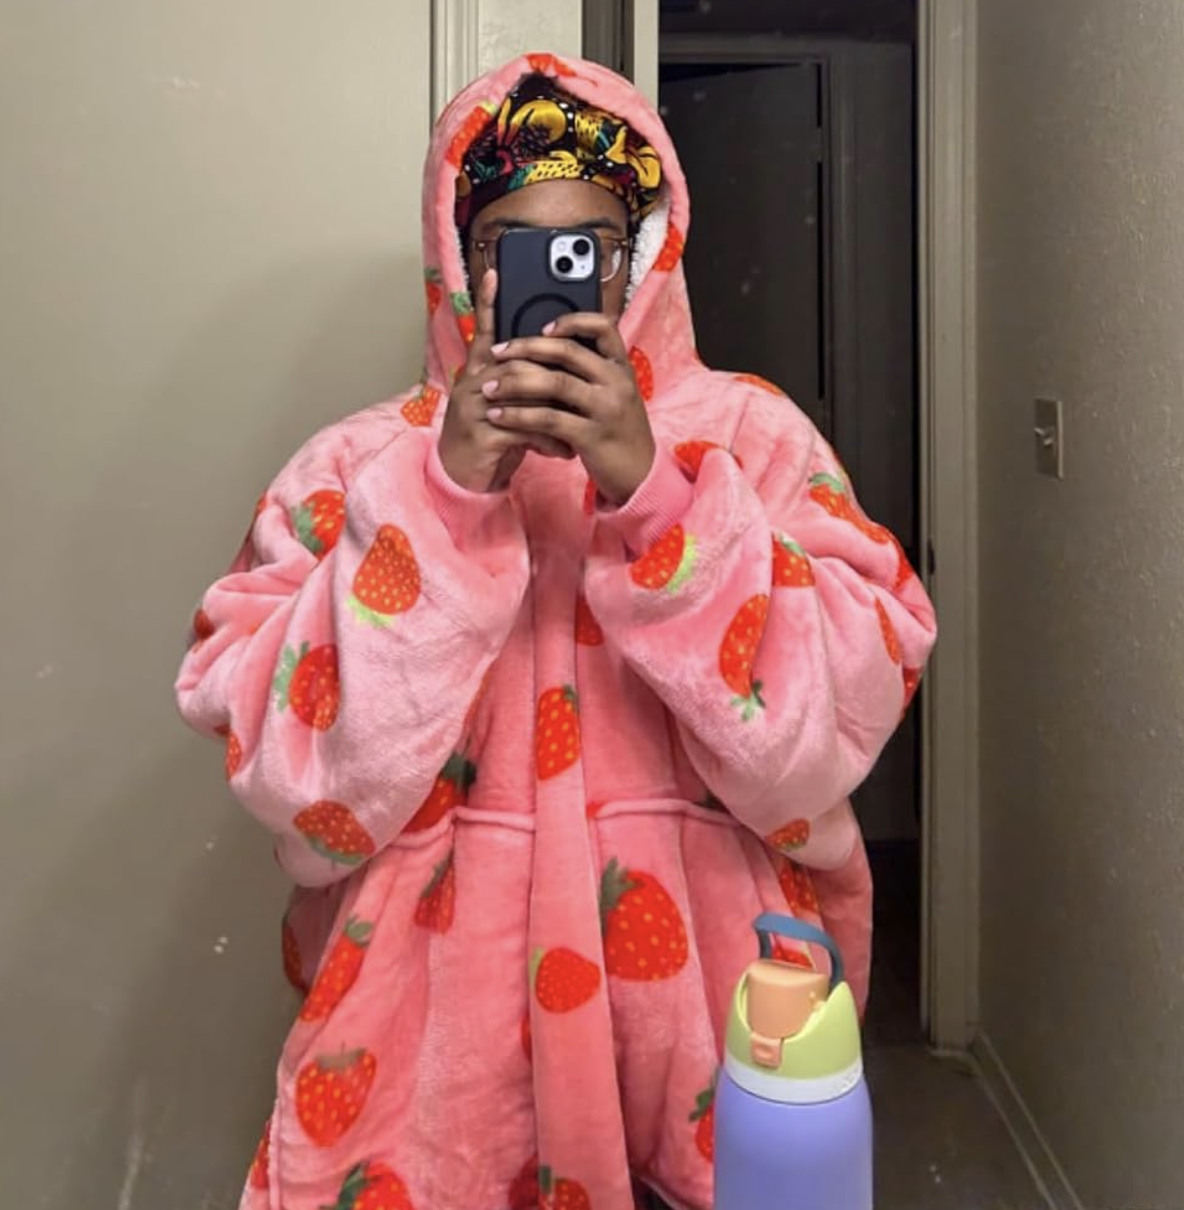 Reviewer taking mirror selfie in bright pink hooded oversized sweater with red strawberries printed on it